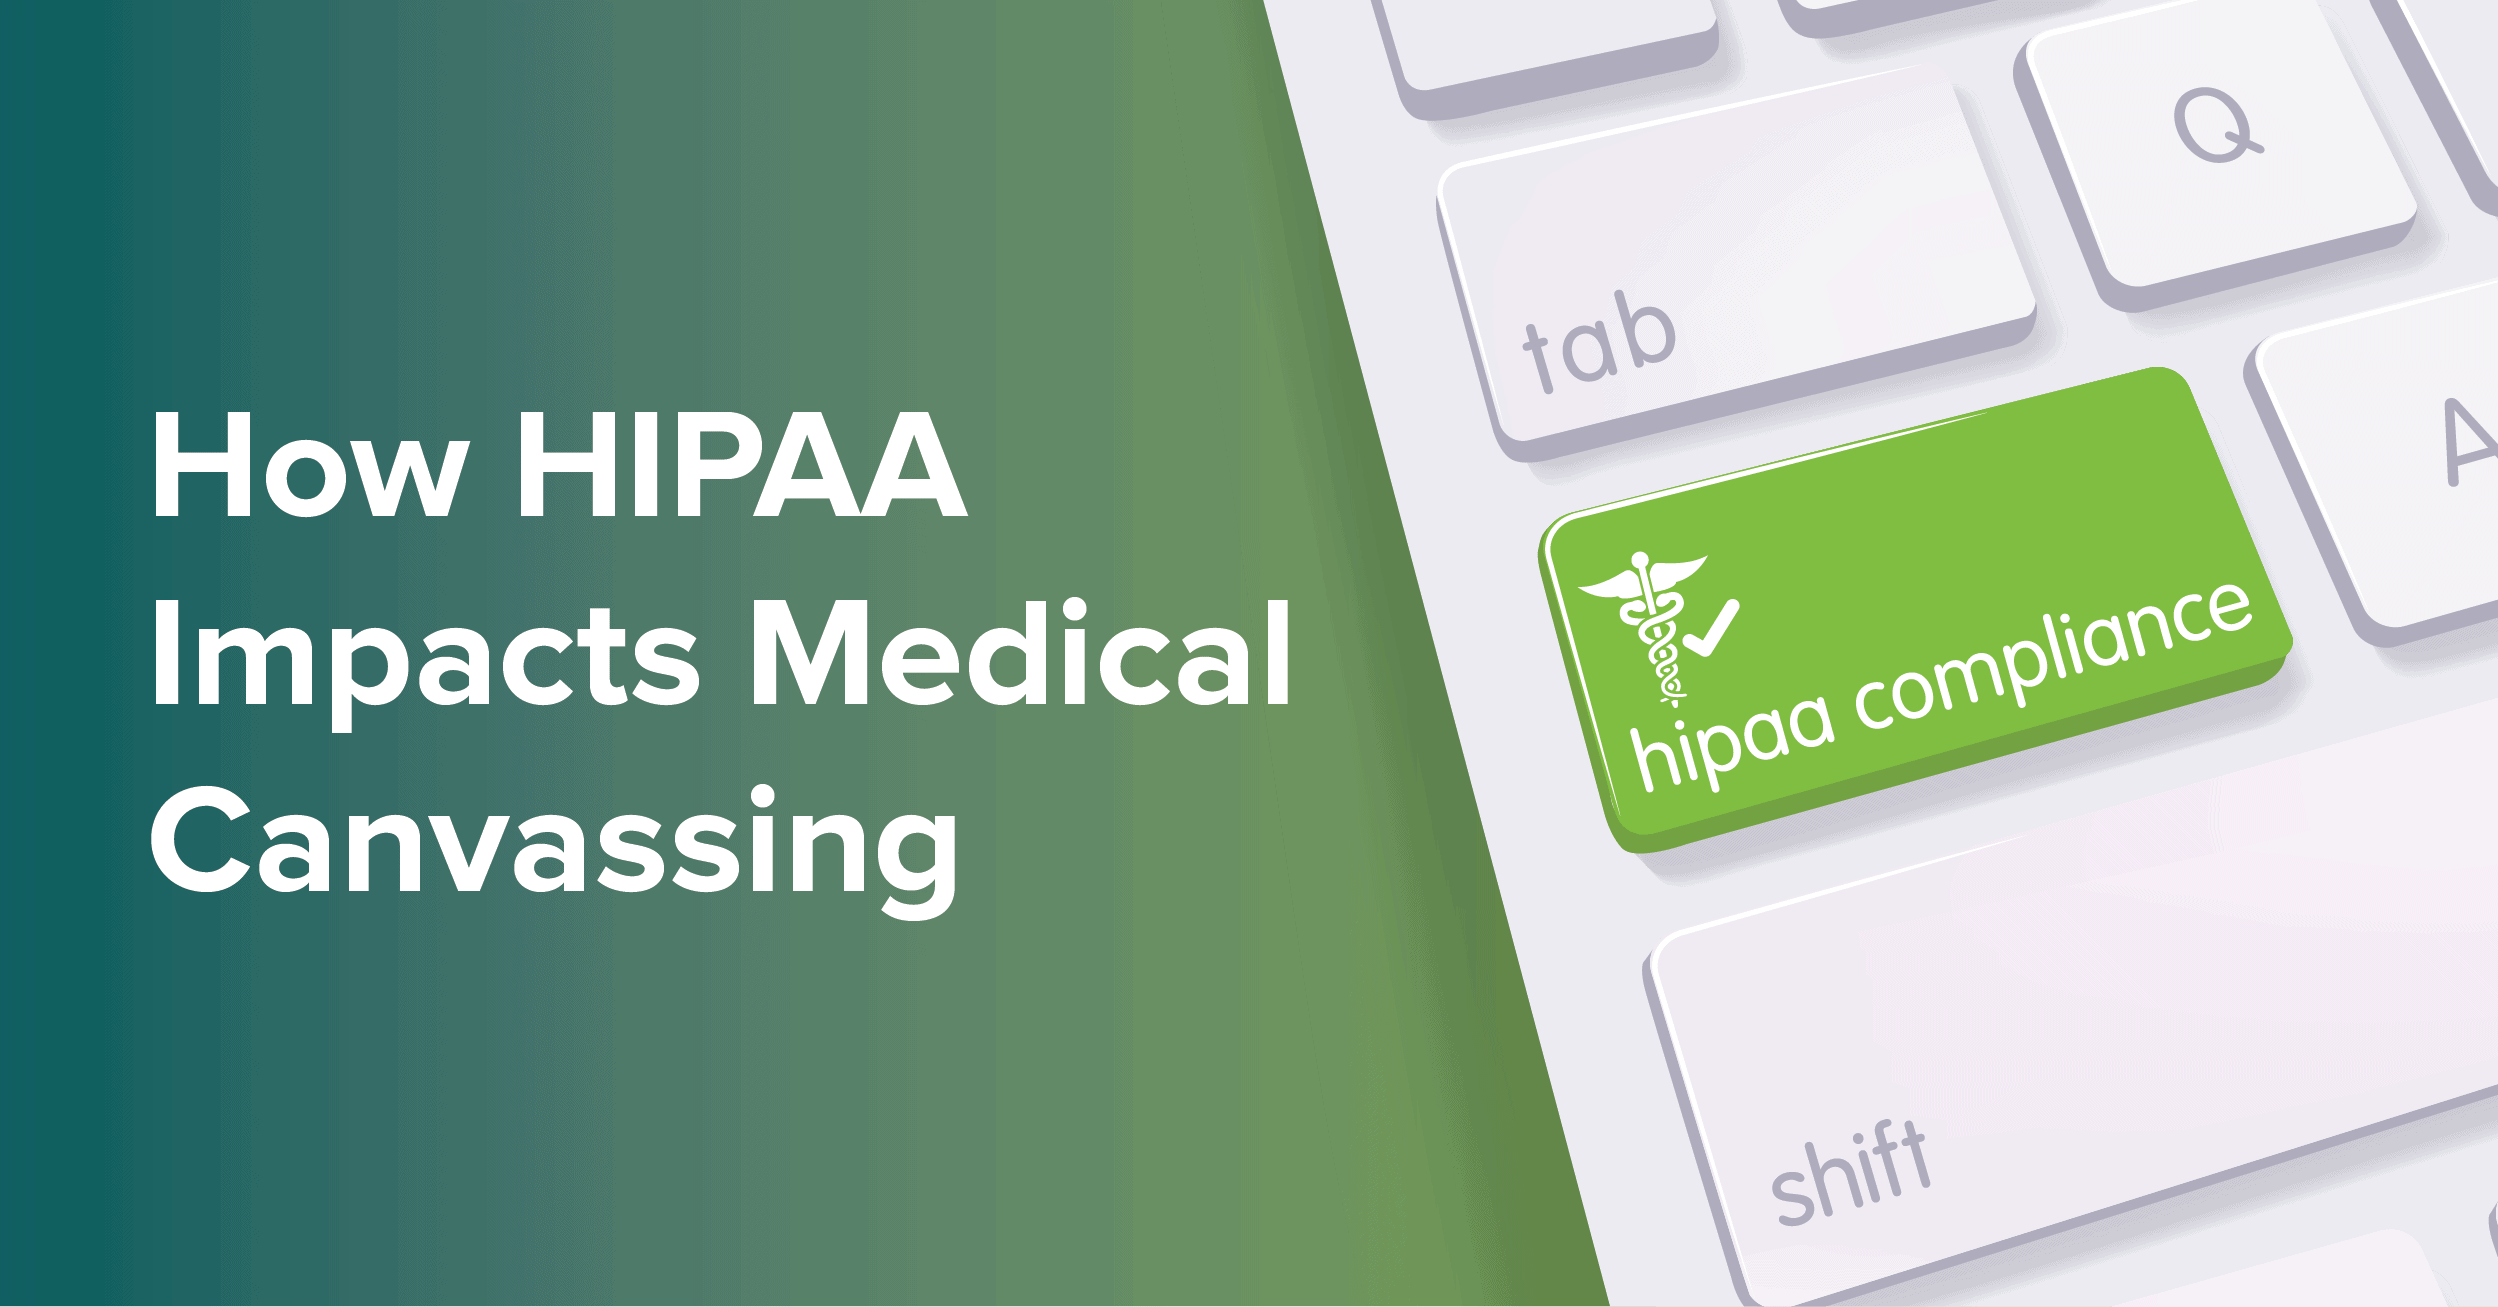 How HIPAA Impacts Medical Canvassing